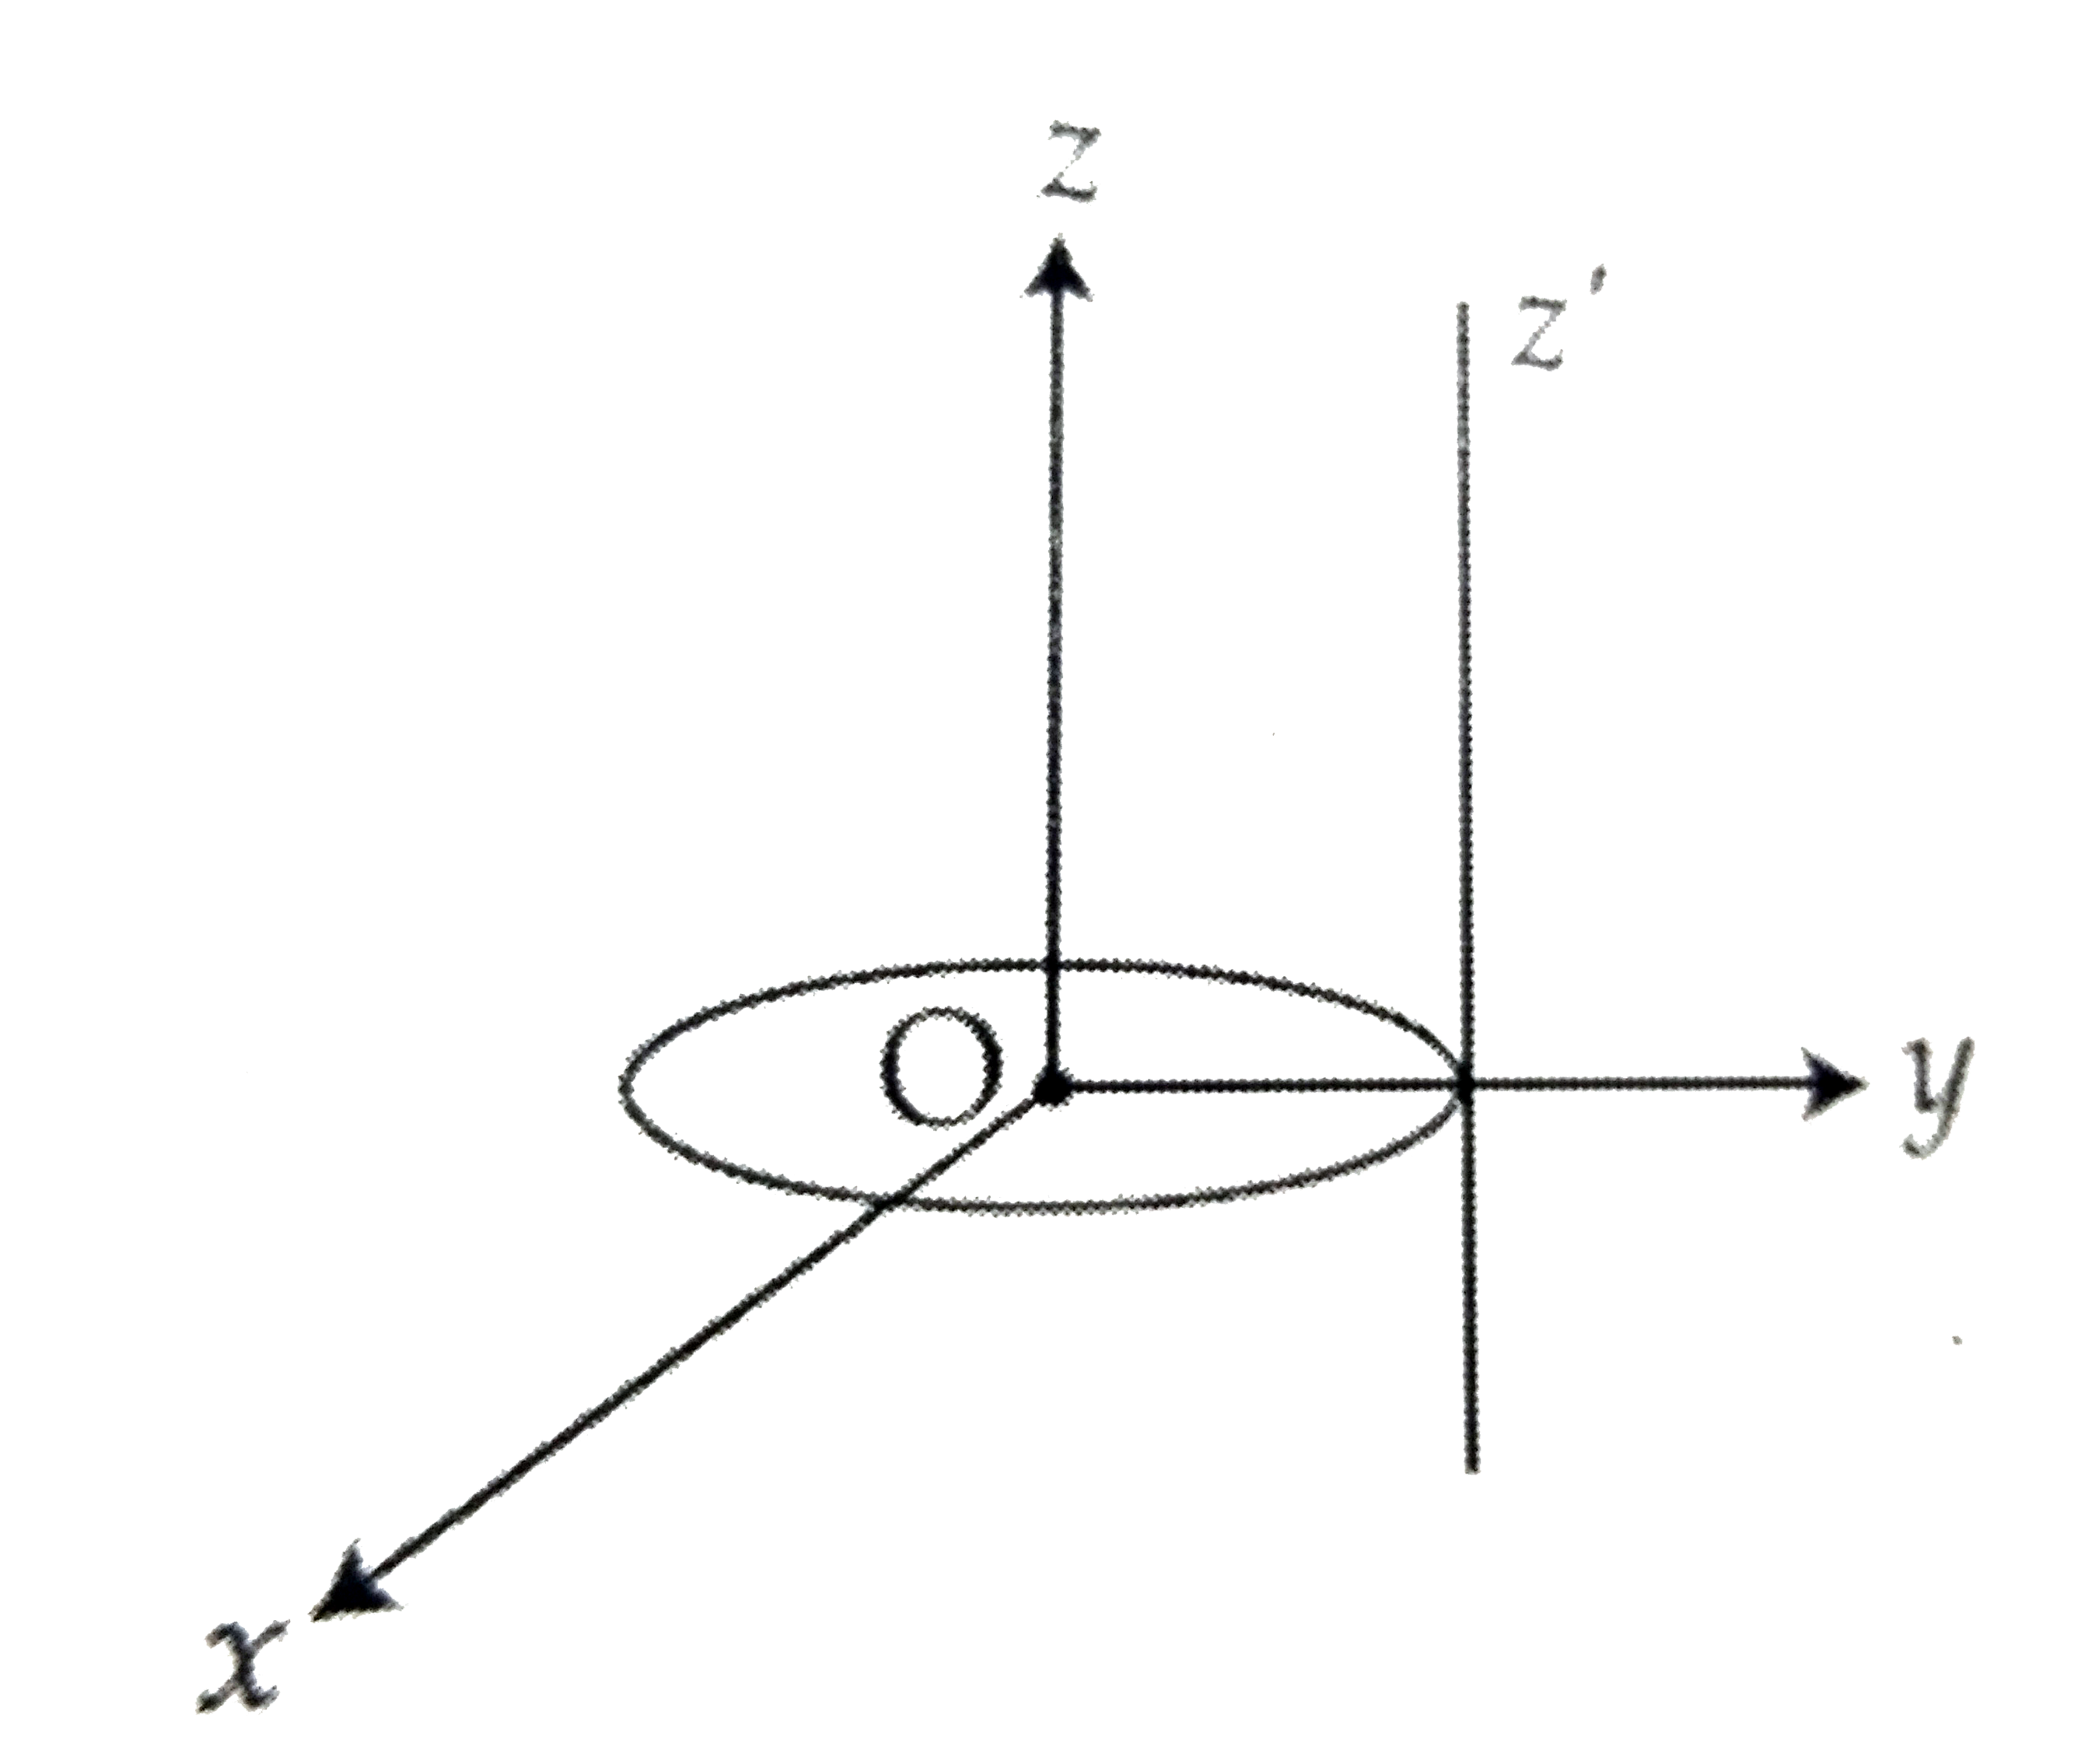 A thin circular disk is in the xy plane as shown in the figure. The ratio of its moment of inertia about z and z' axes will be :